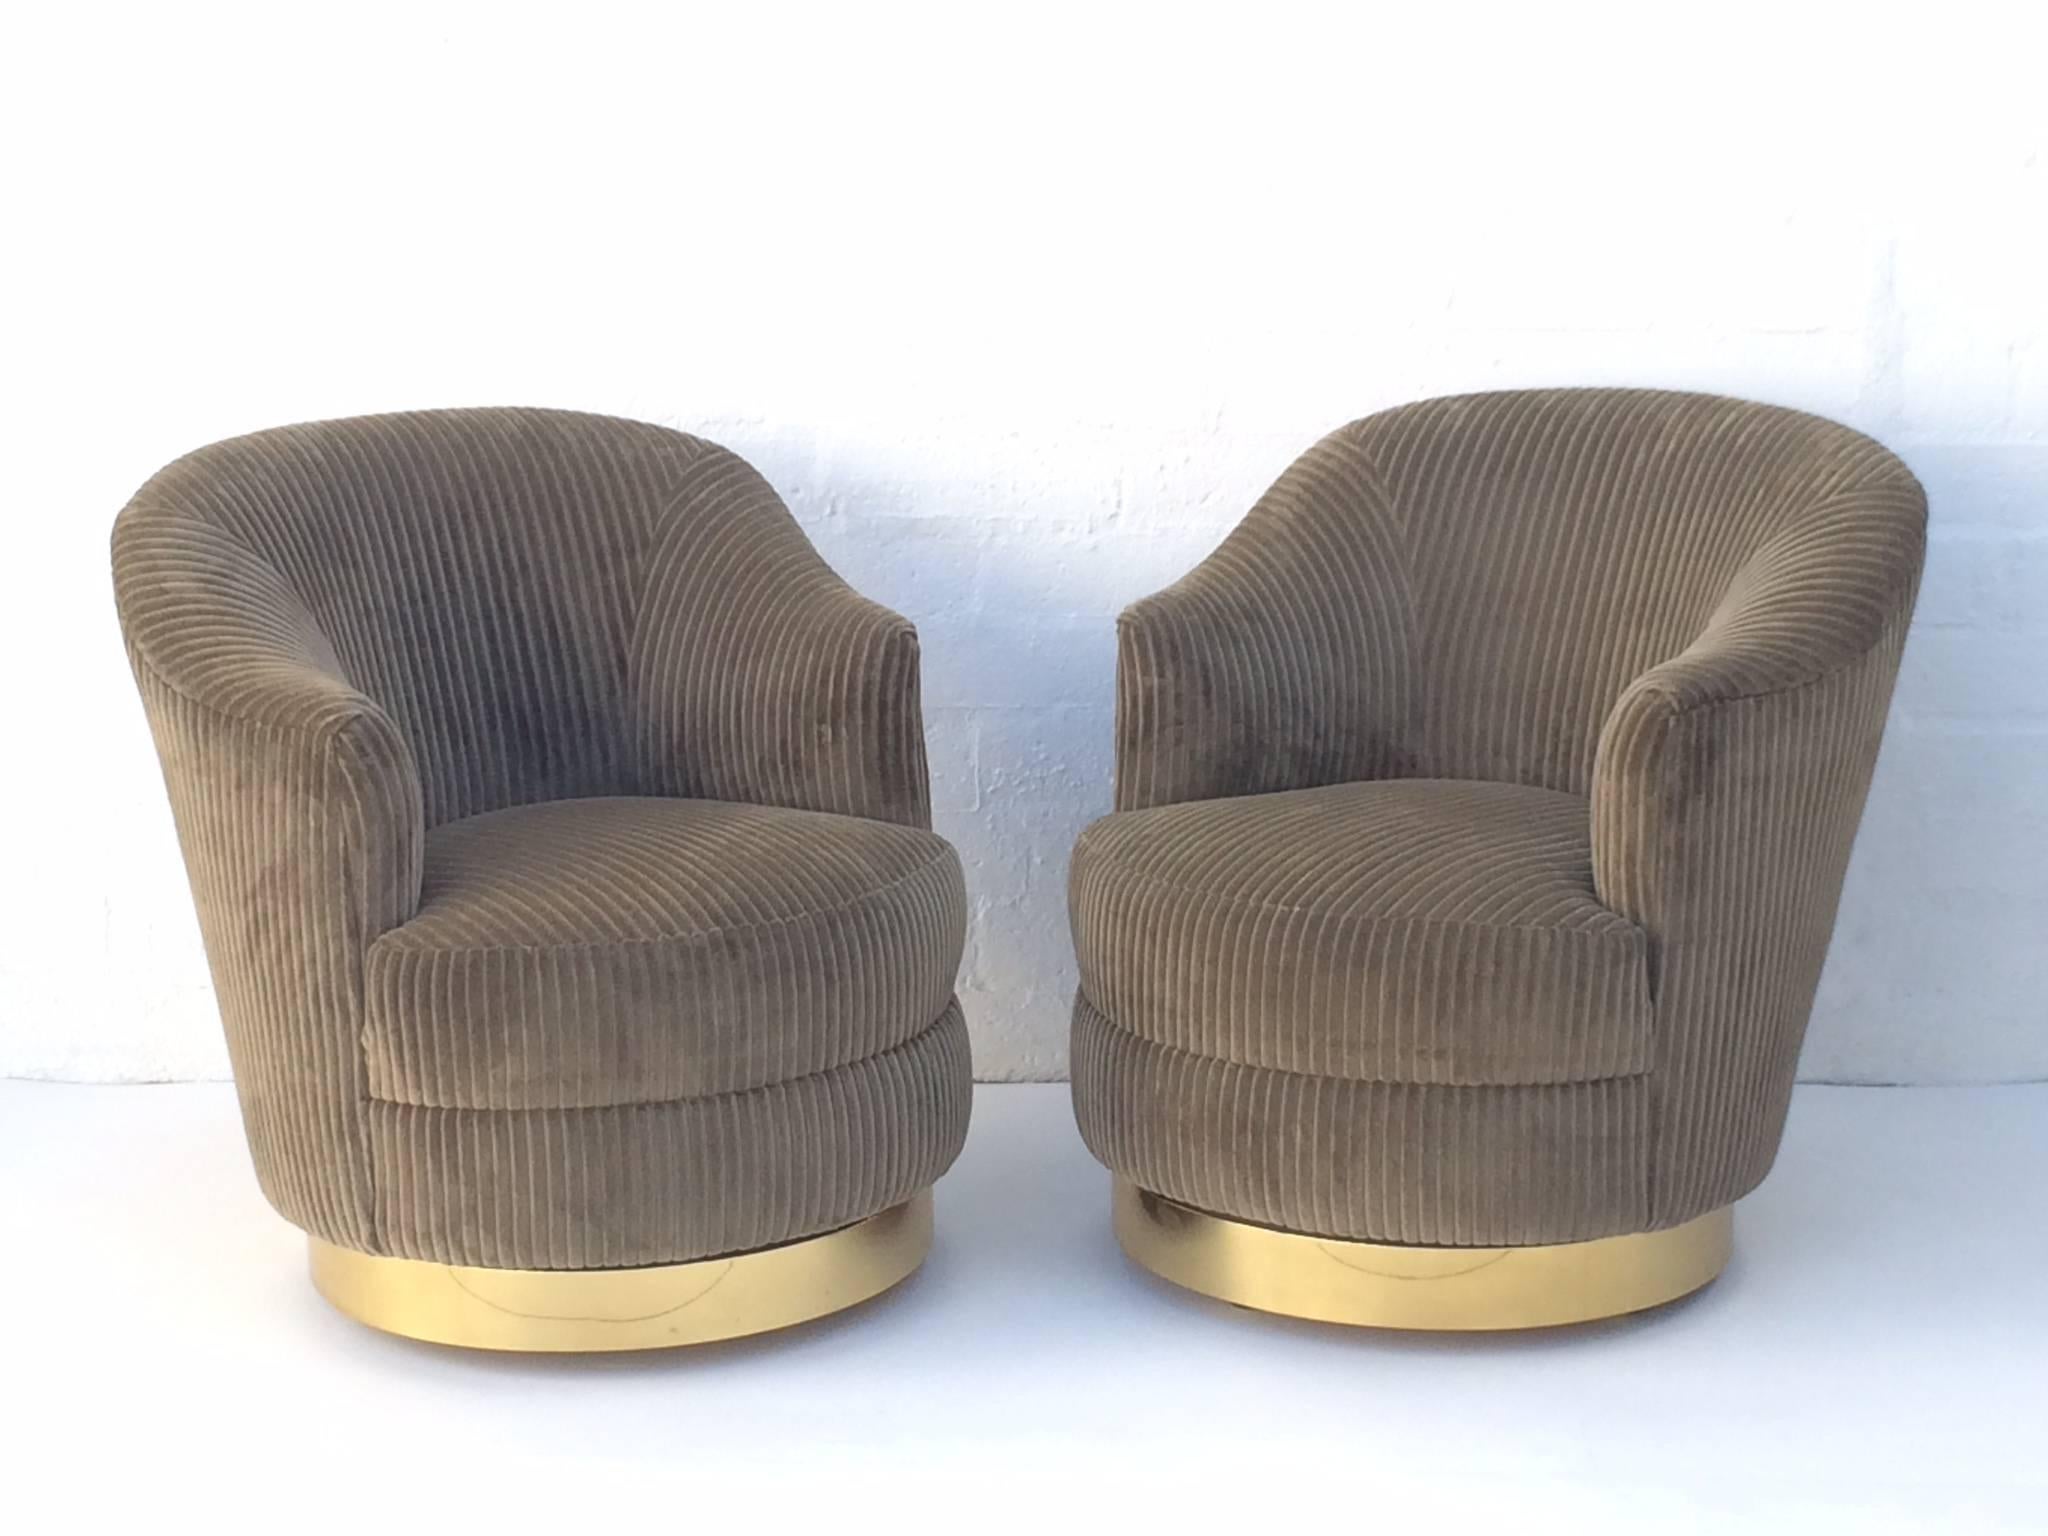 This beautifully design chairs have been upholster in a light brown thick soft corduroy fabric that enhances the lines of the chair. The solid polished brass swivel base with casters are in excellent condition.